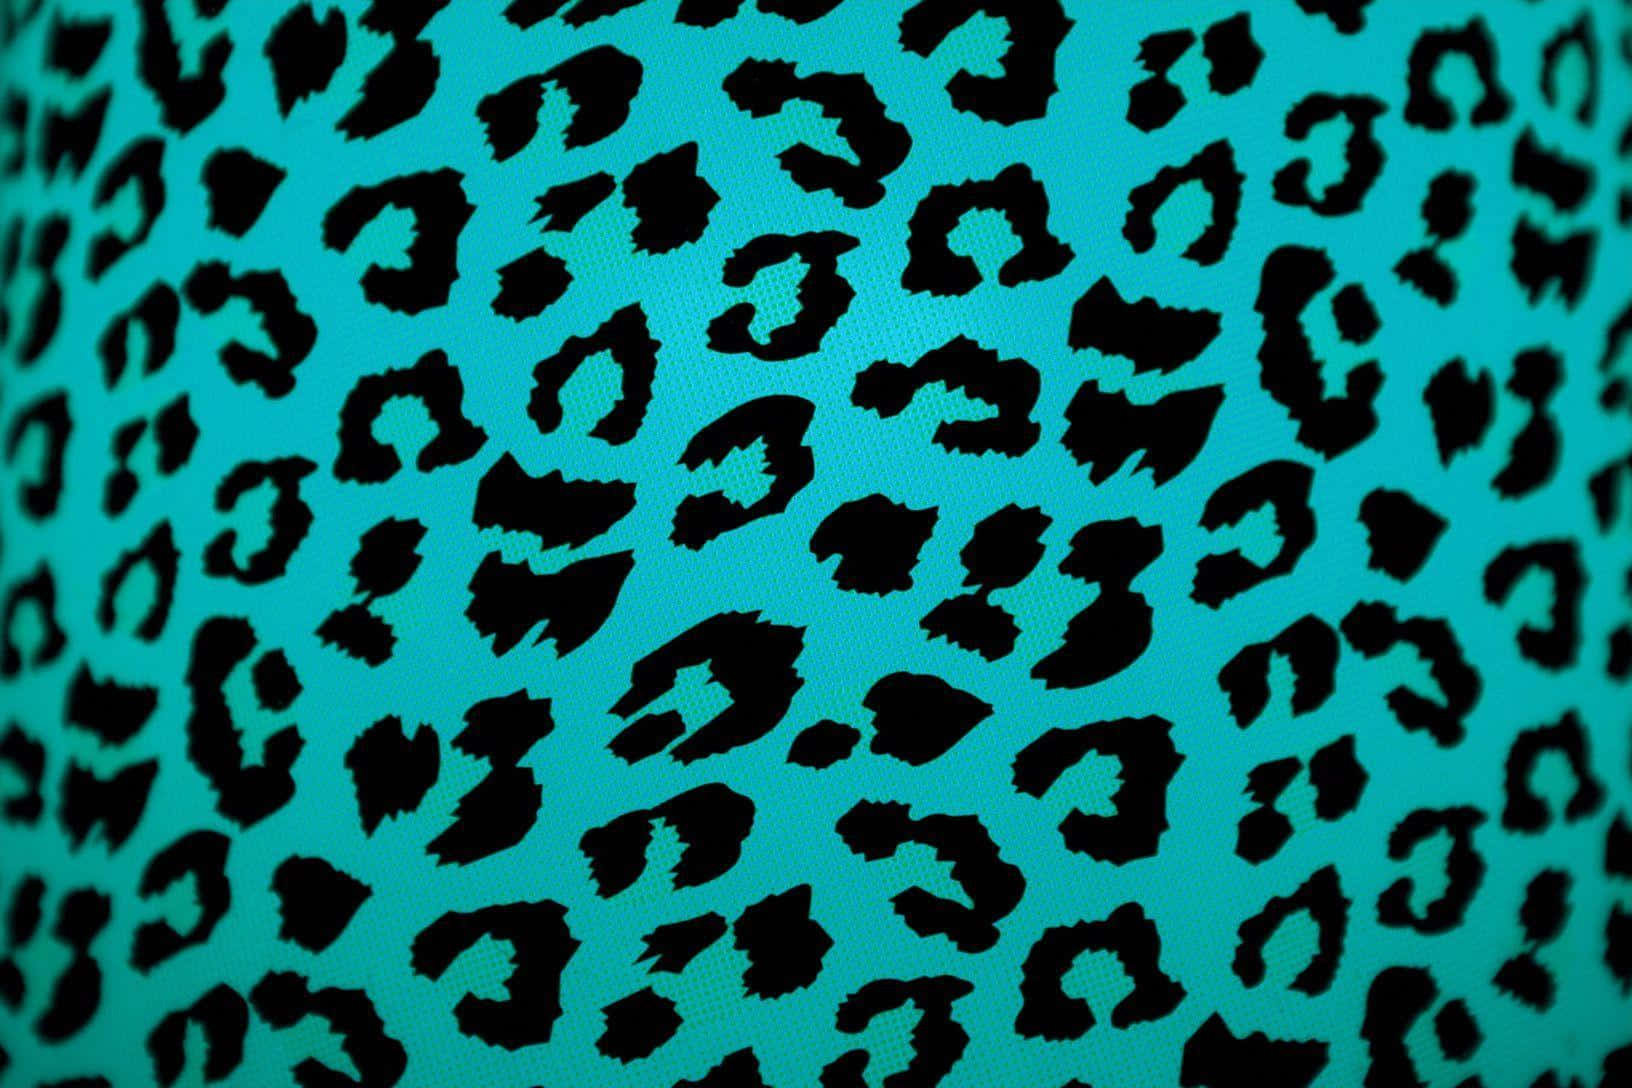 Show Off Your Wild Side with Animal Print Wallpaper